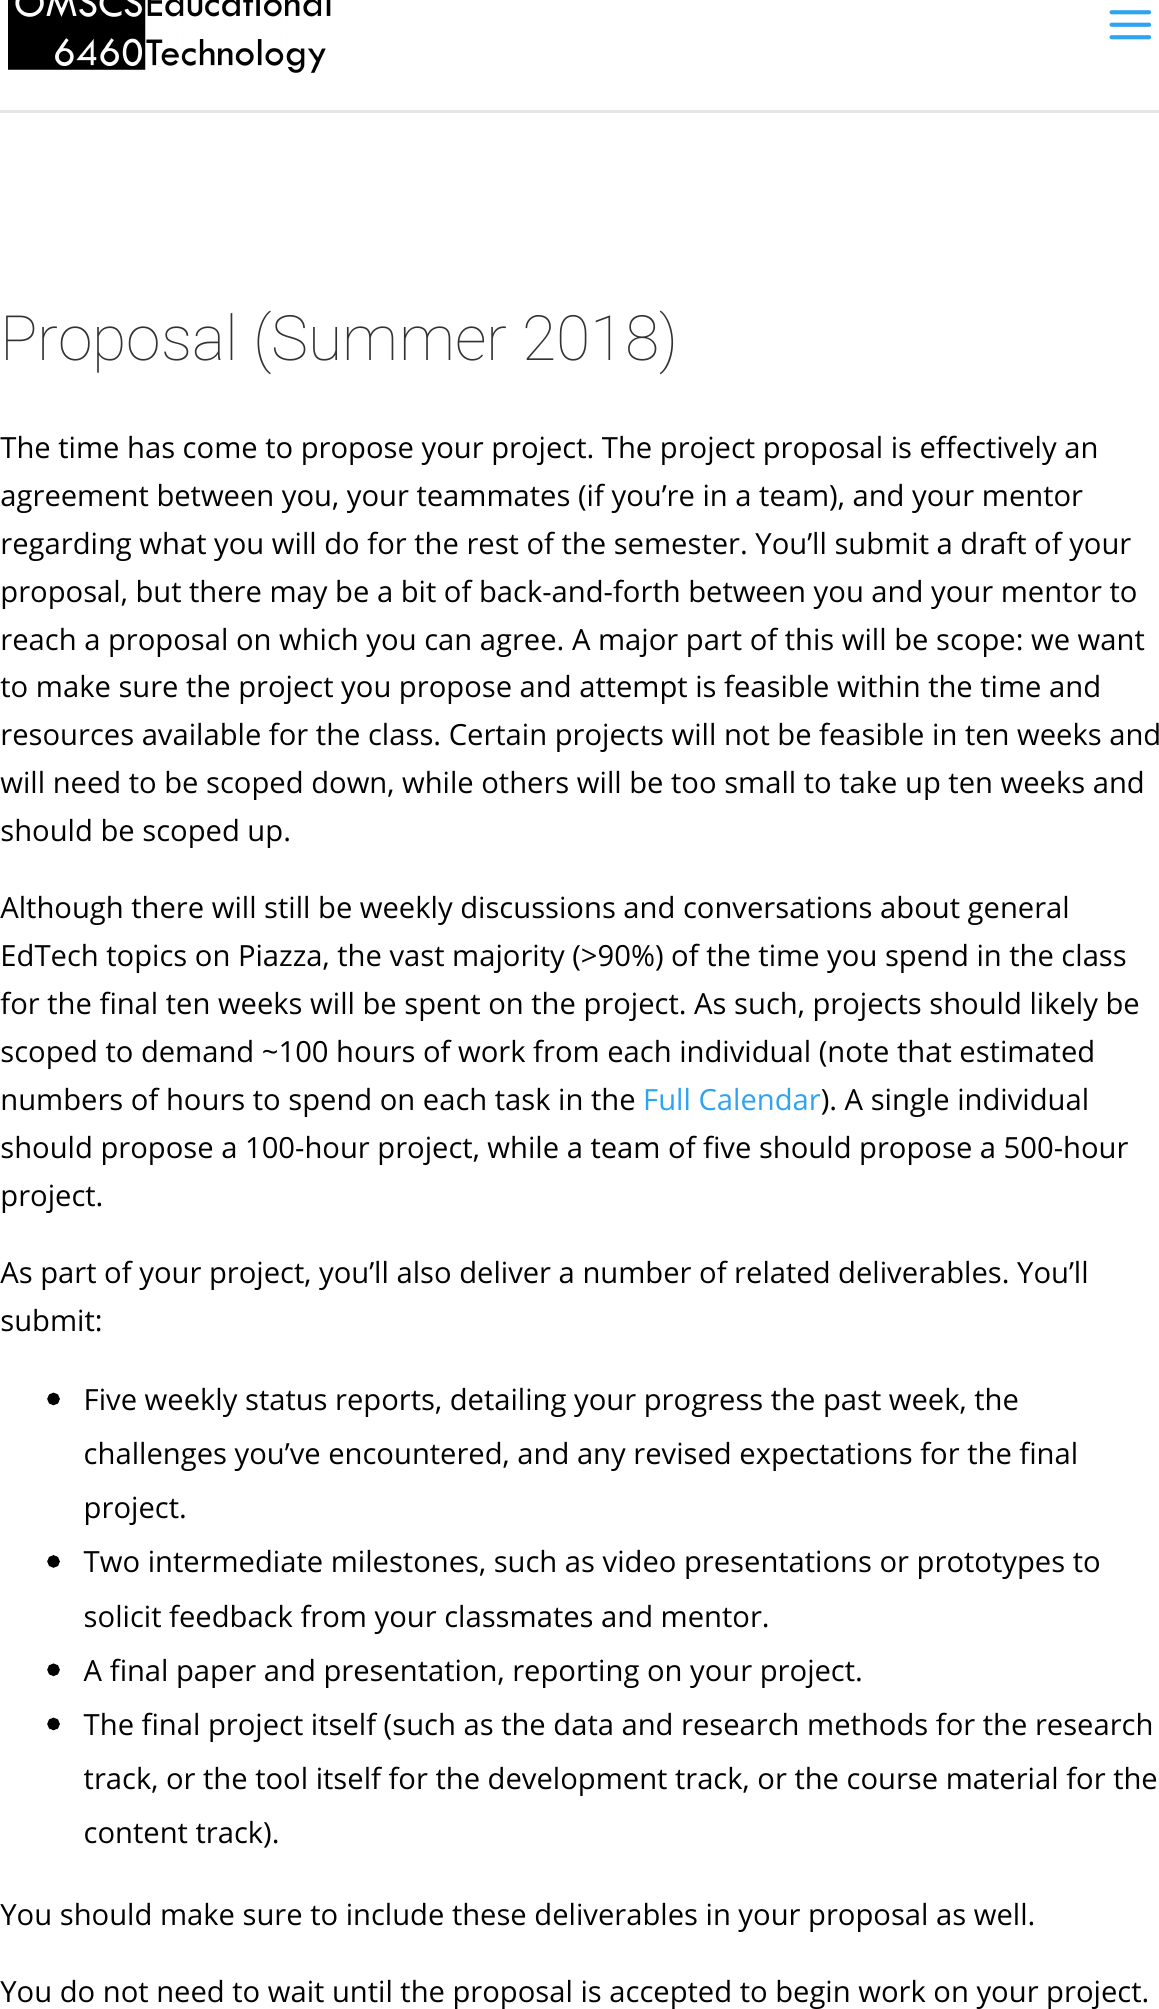 Page 1 of 5 - Instructions-Proposal